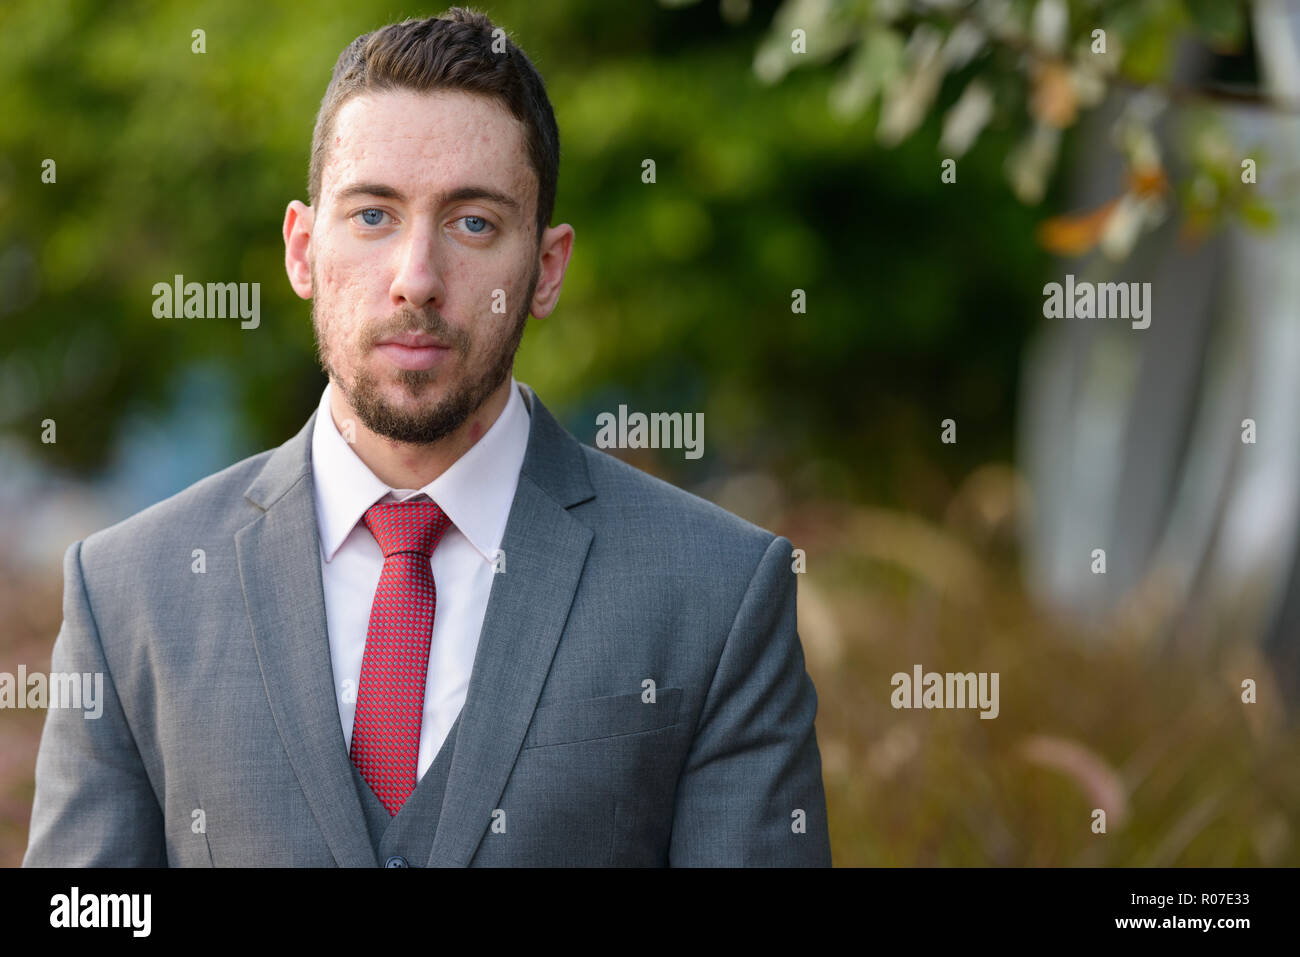 Portrait of young confident businessman outdoors at park Stock Photo